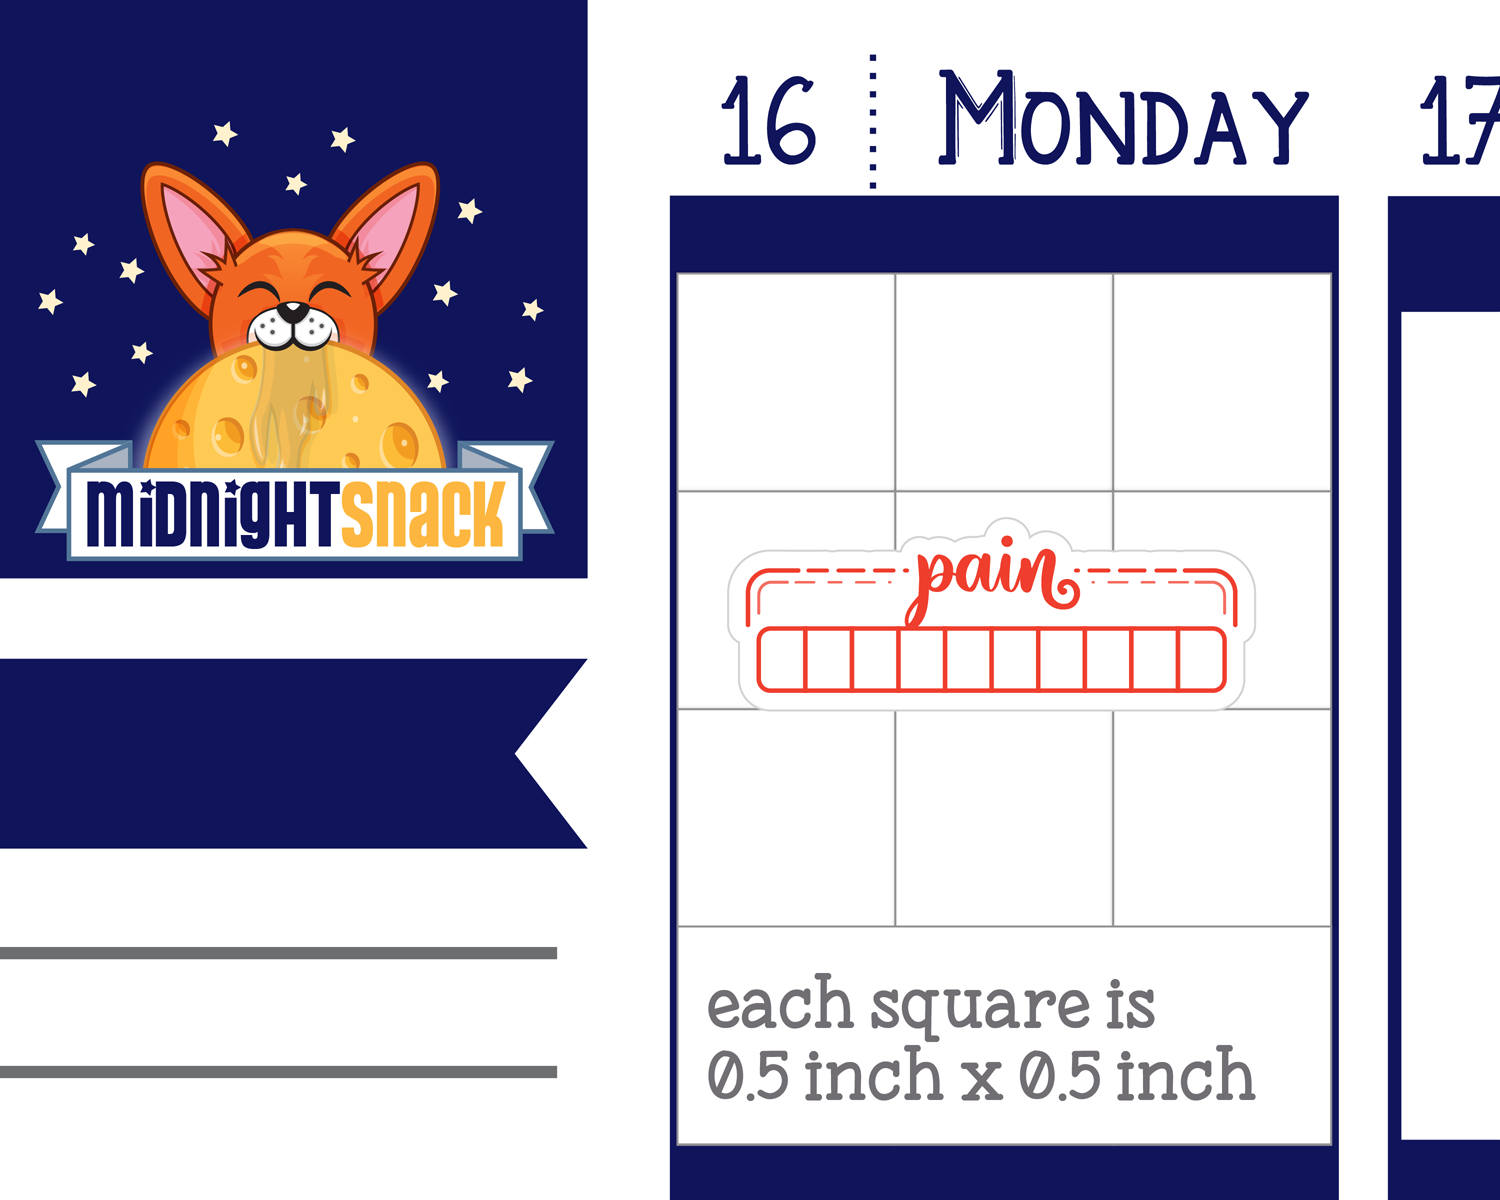 Pain Tracker Planner Stickers: Pain Scale 1-10